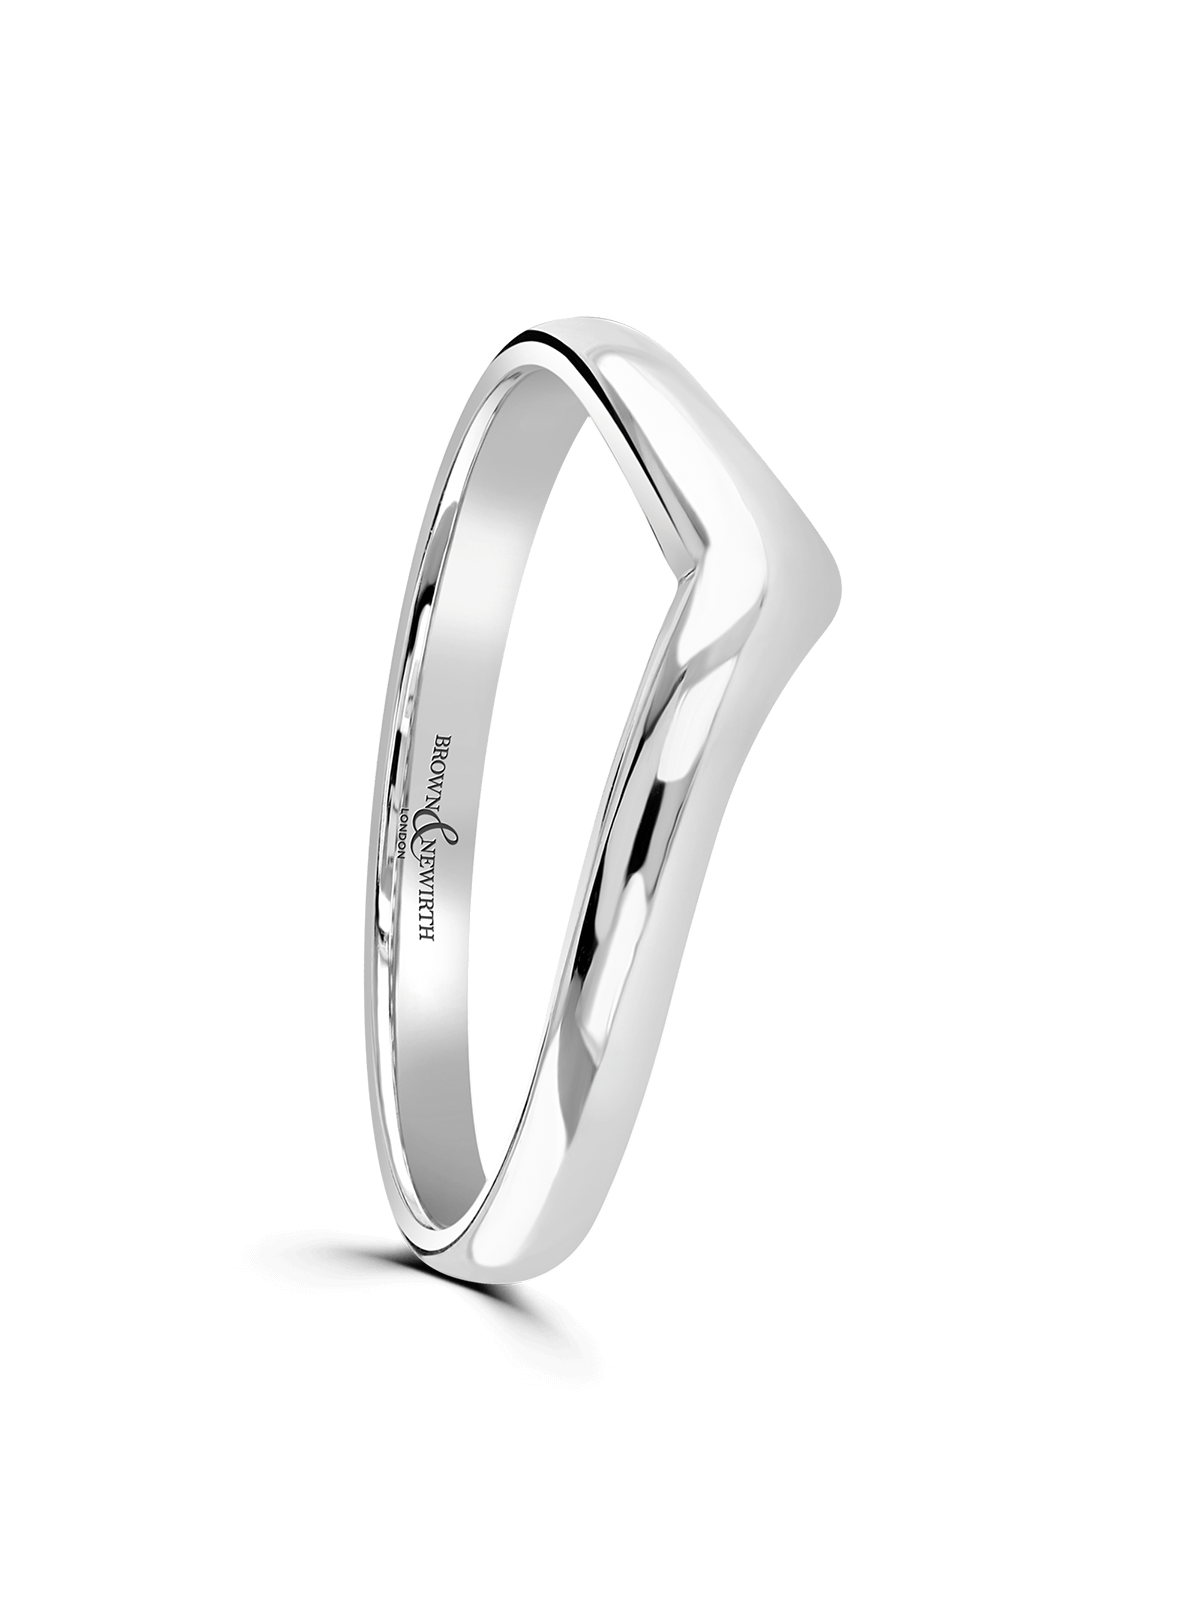 Brown & Newirth Amulet Wedding Ring in 9ct White Gold